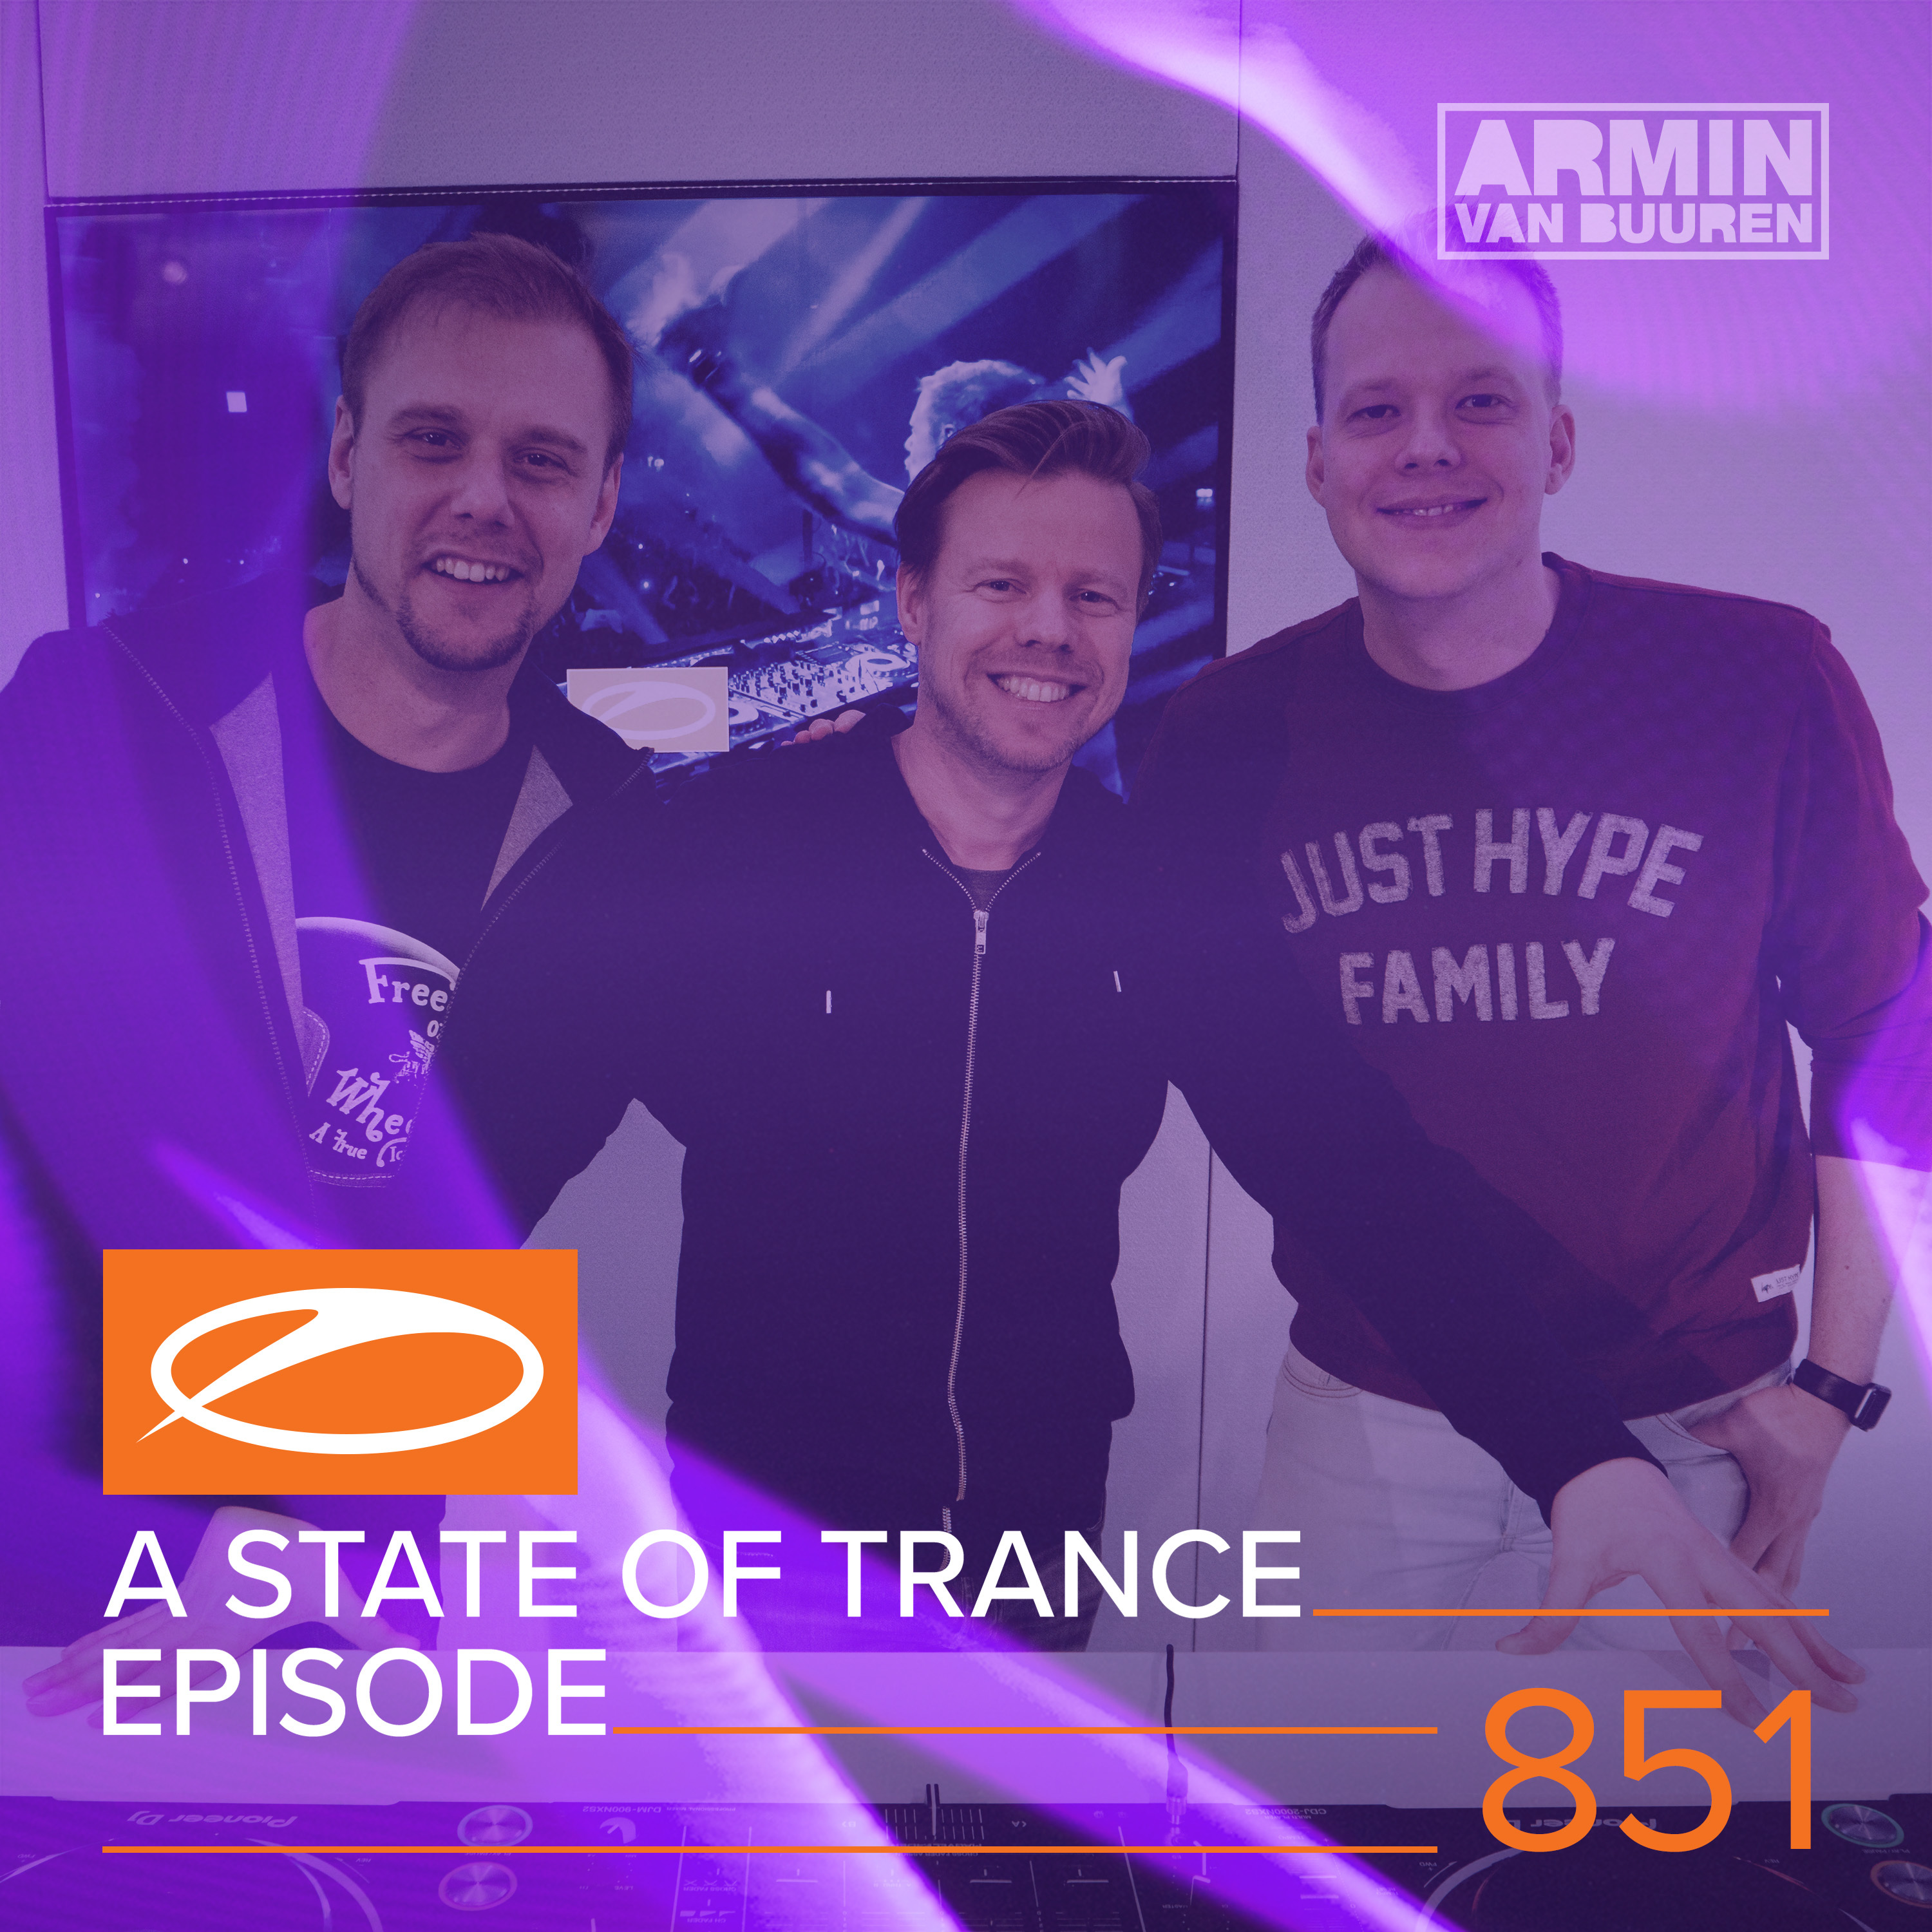 The Dawning (ASOT 851)